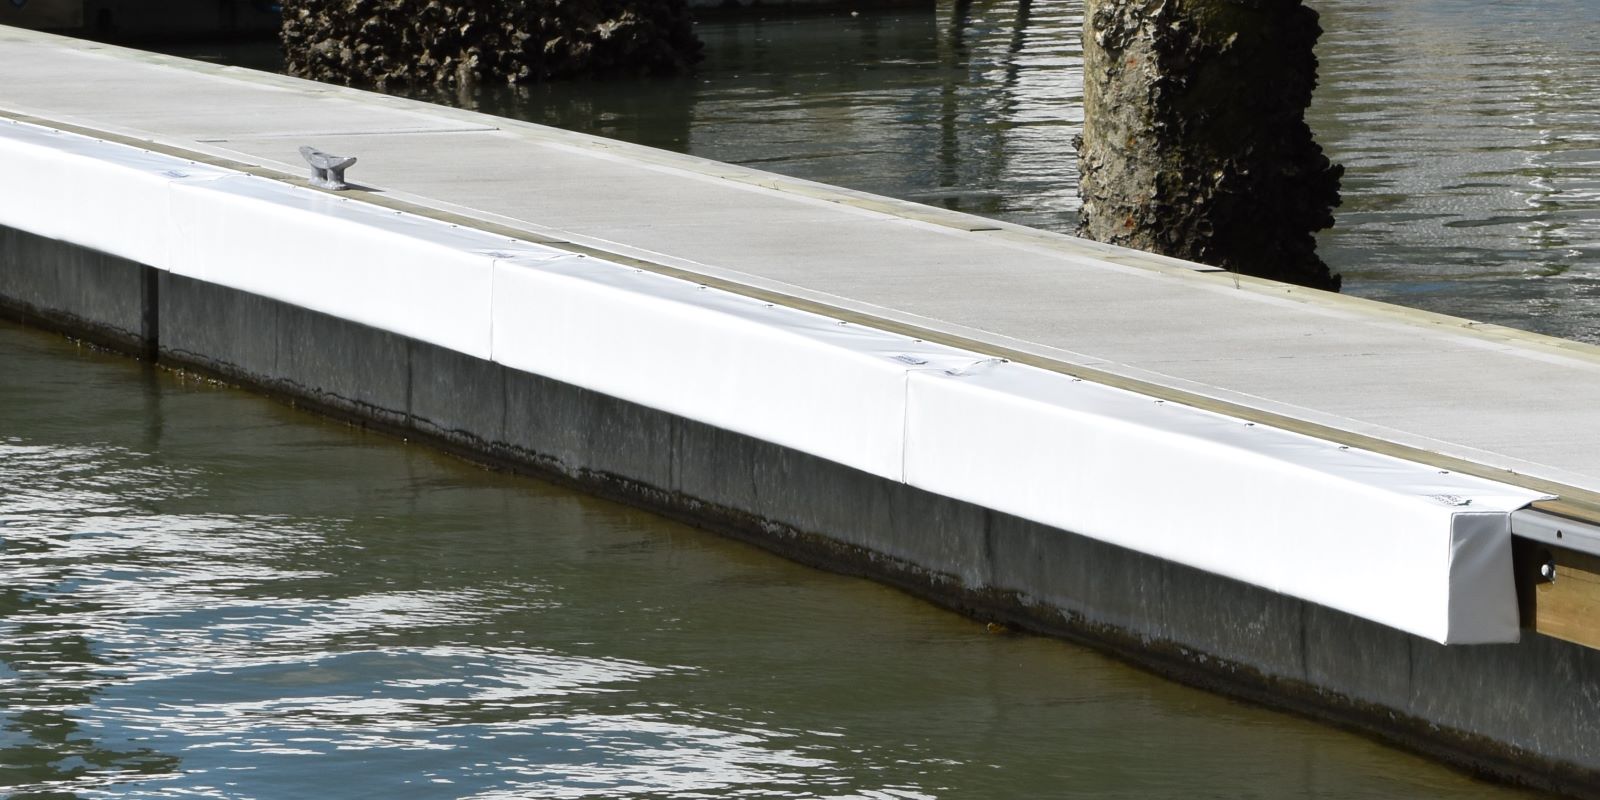 Contoured Barrier Fenders available from Hauraki Fenders - 2m pvc covered foam marina fender shaped to fit around a marina berth rub strip